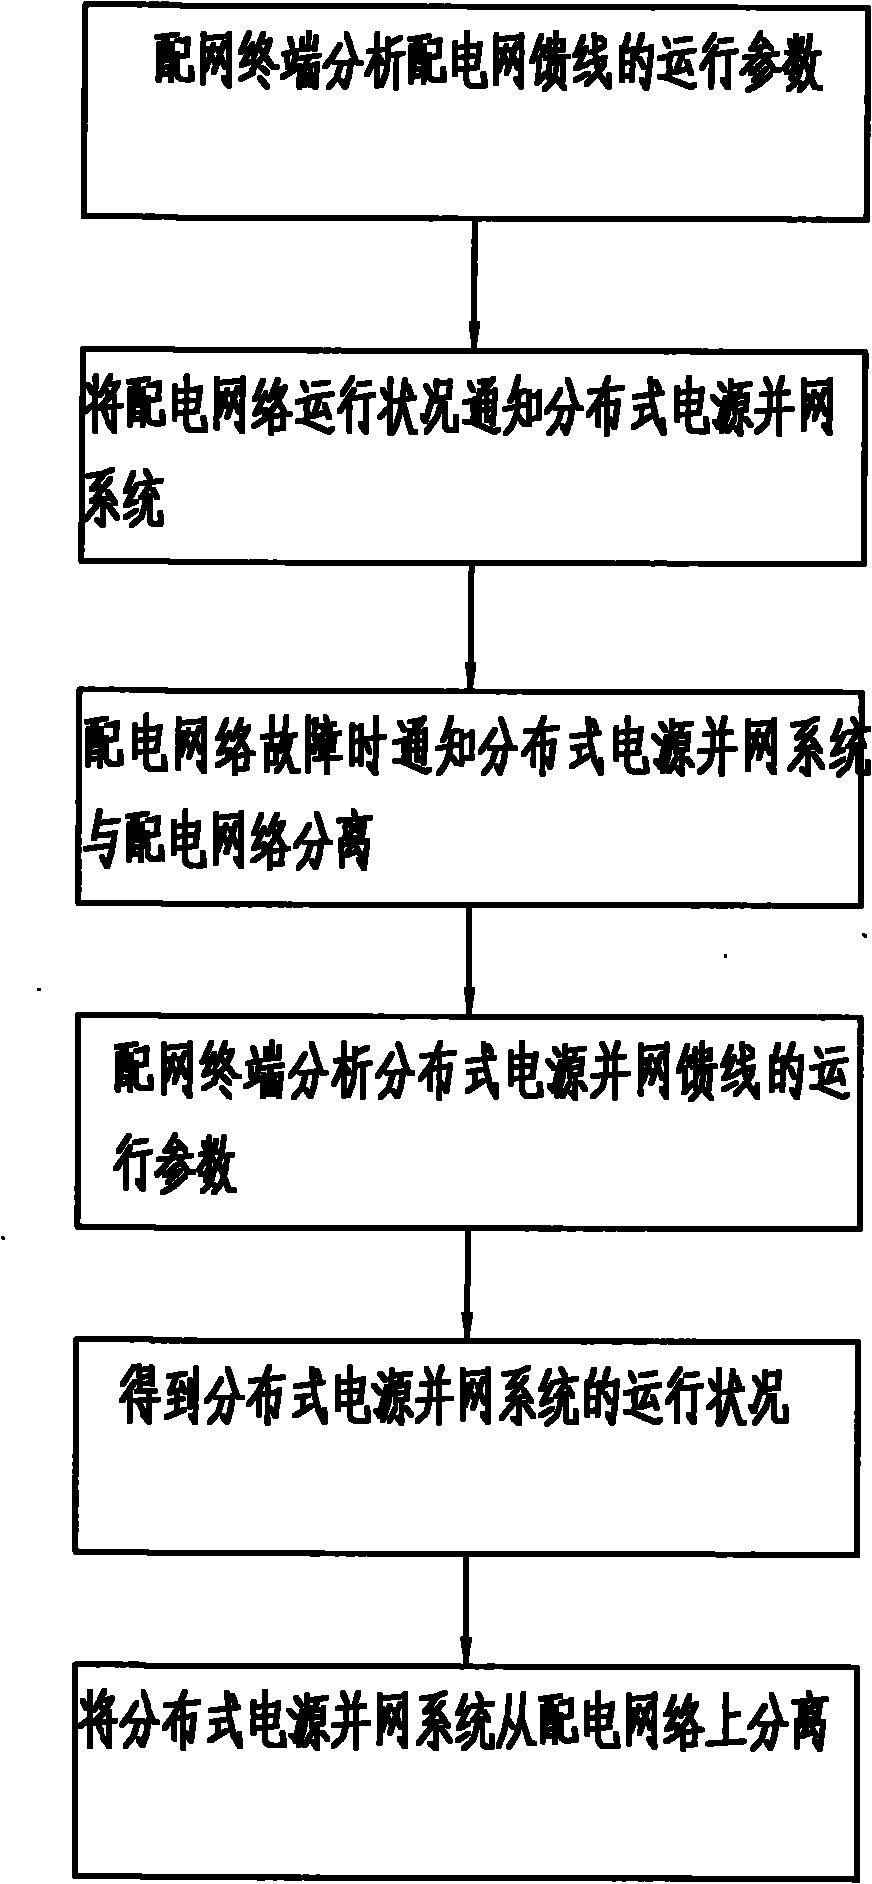 Method for preventing grid-connected island effect of distributed power source